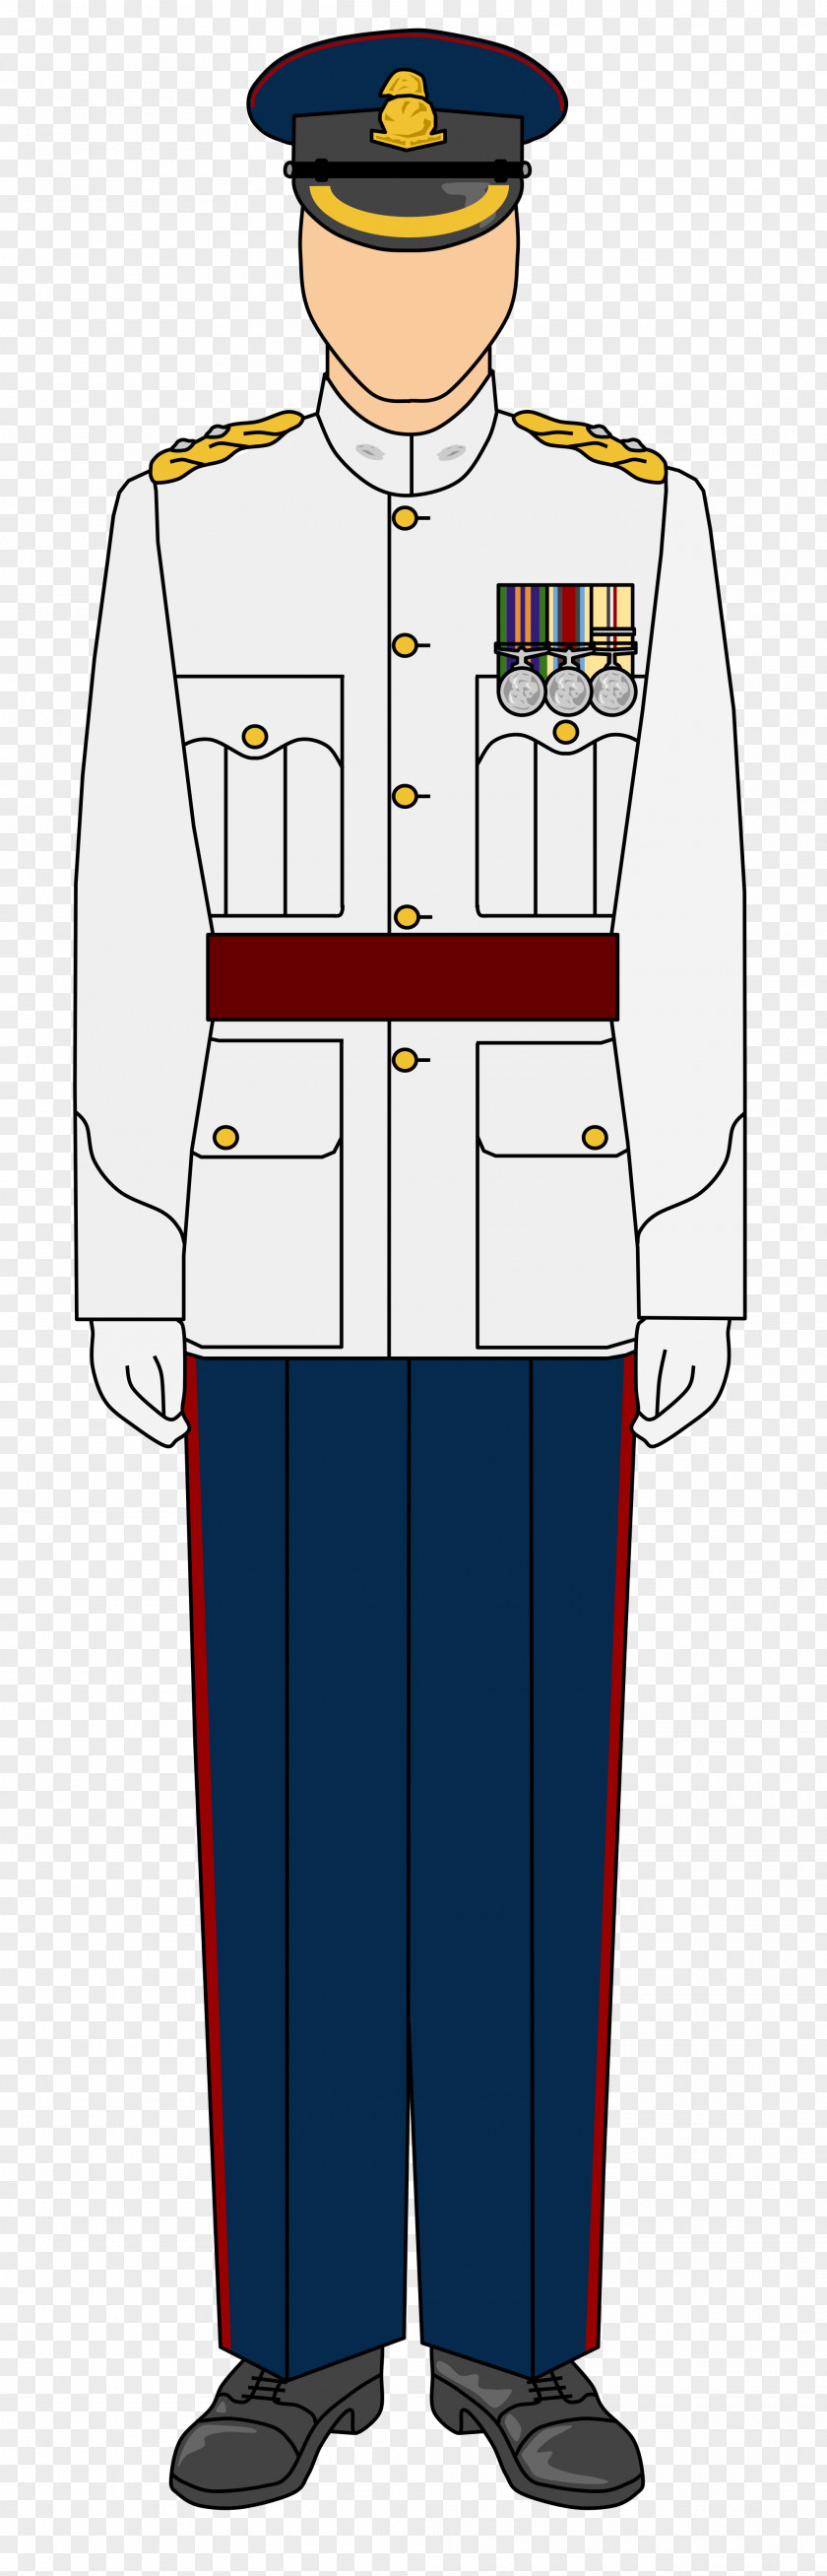 Ceremonial Uniform Uniforms Of The British Army Mess Dress Full Service PNG